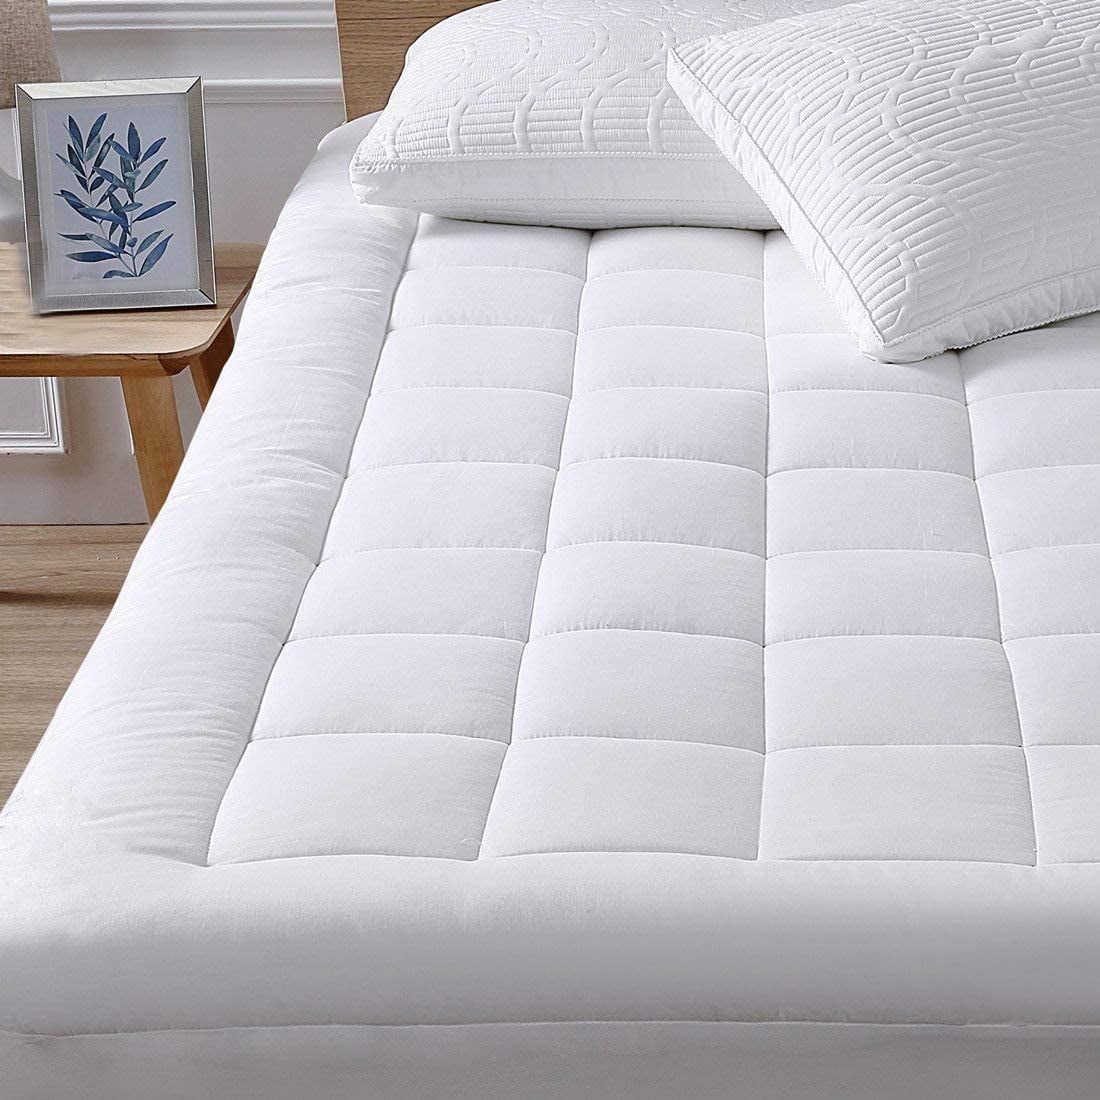 LUXURY SINGLE DOUBLE BUNK 4FT DOUBLE KING QUILTED MATTRESS PROTECTOR TOPPER 